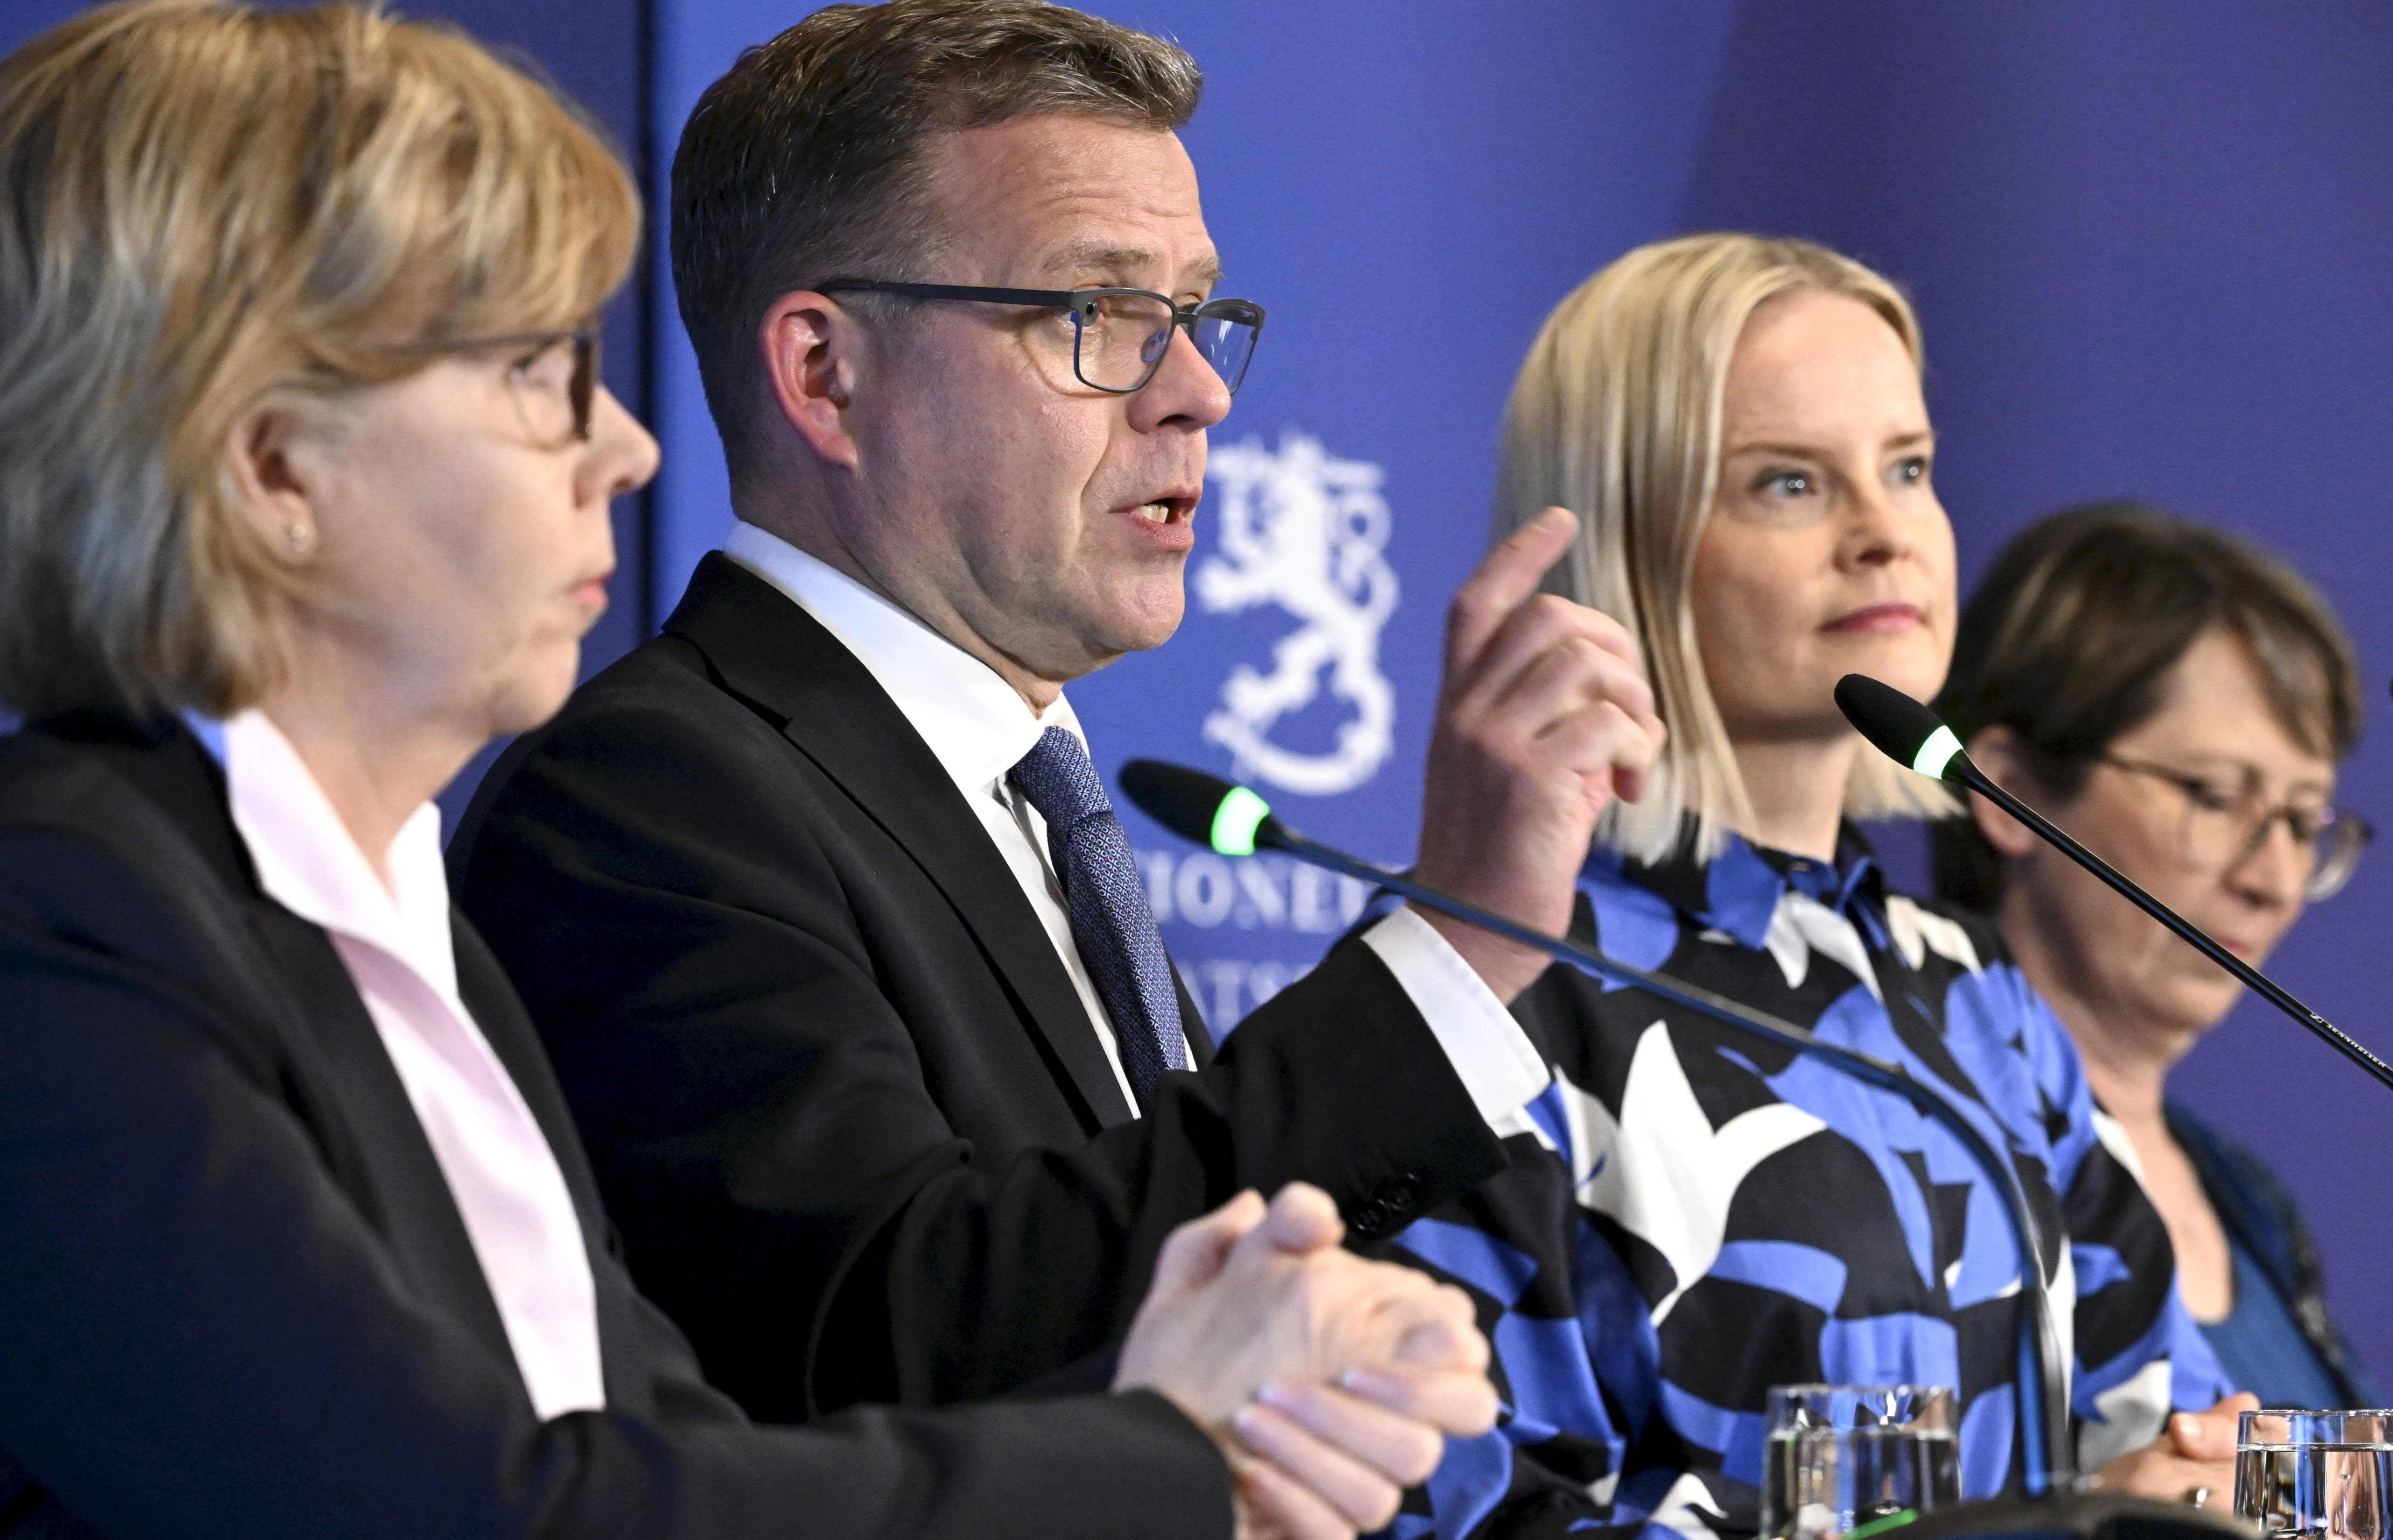 Prime Minister candidate Orpo: Finland’s economic situation “even worse than I thought”